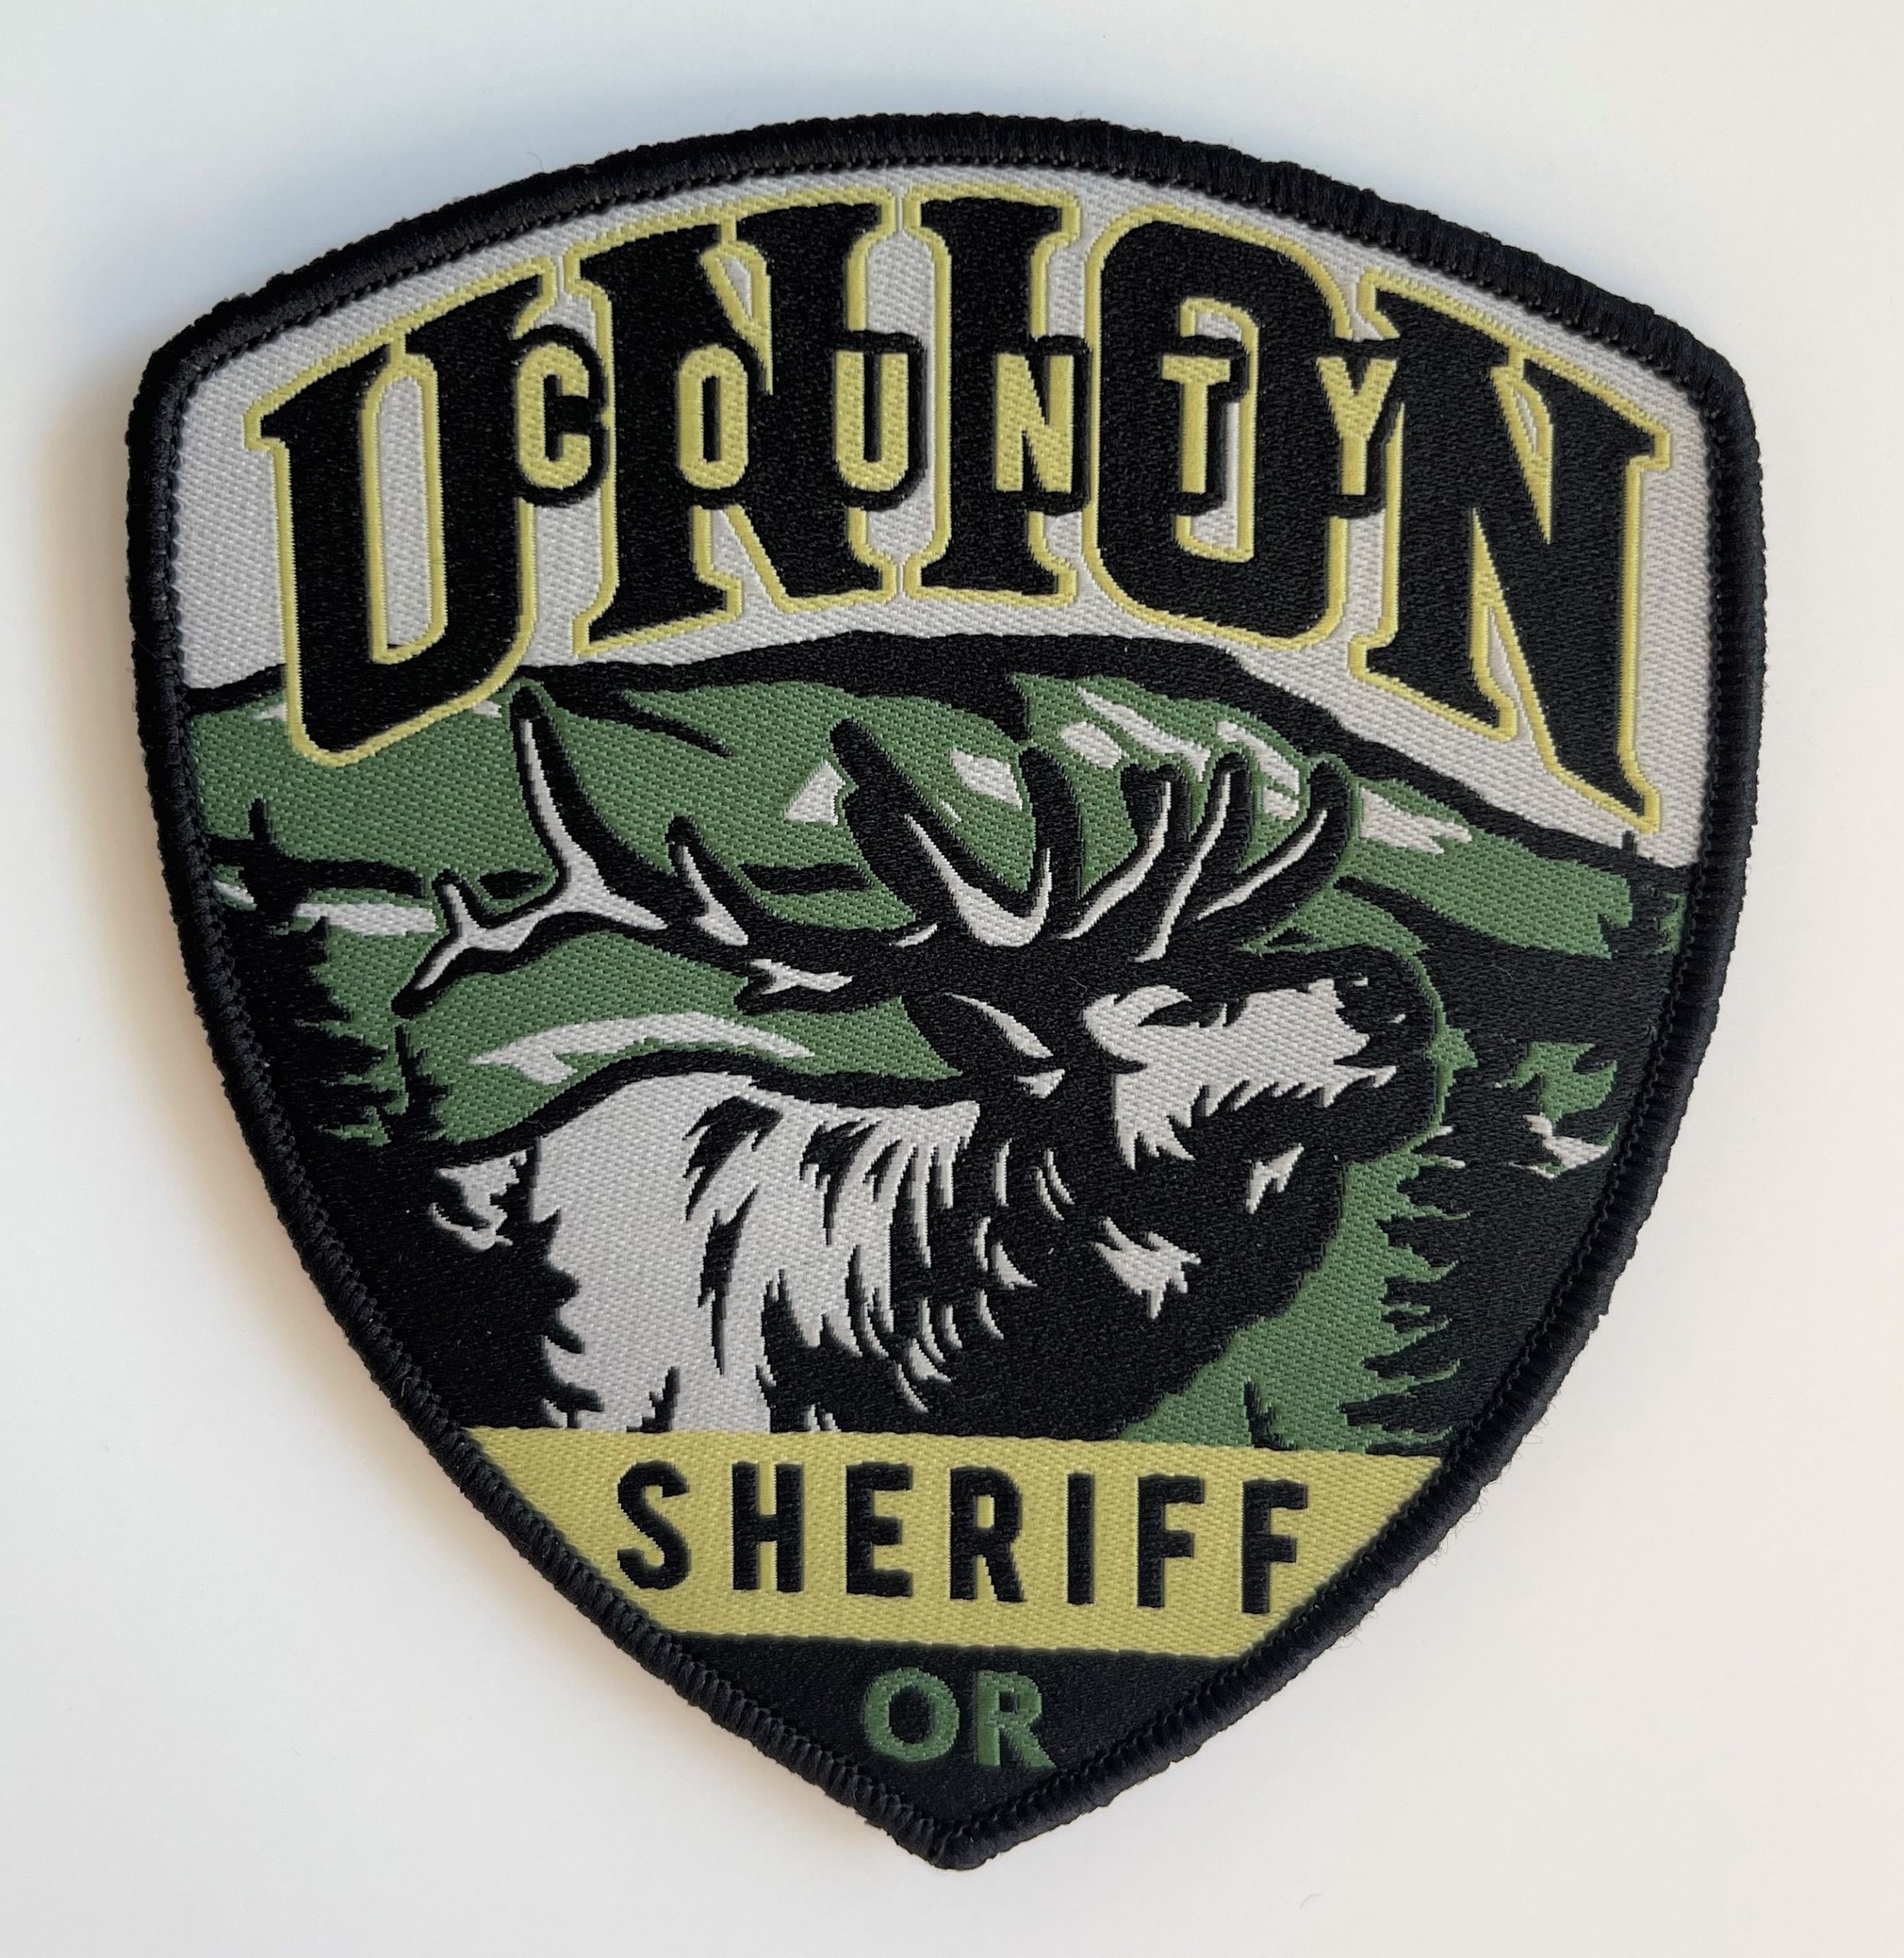 Union County Sheriff's Office Collectible Patch Oregon State Sheriffs